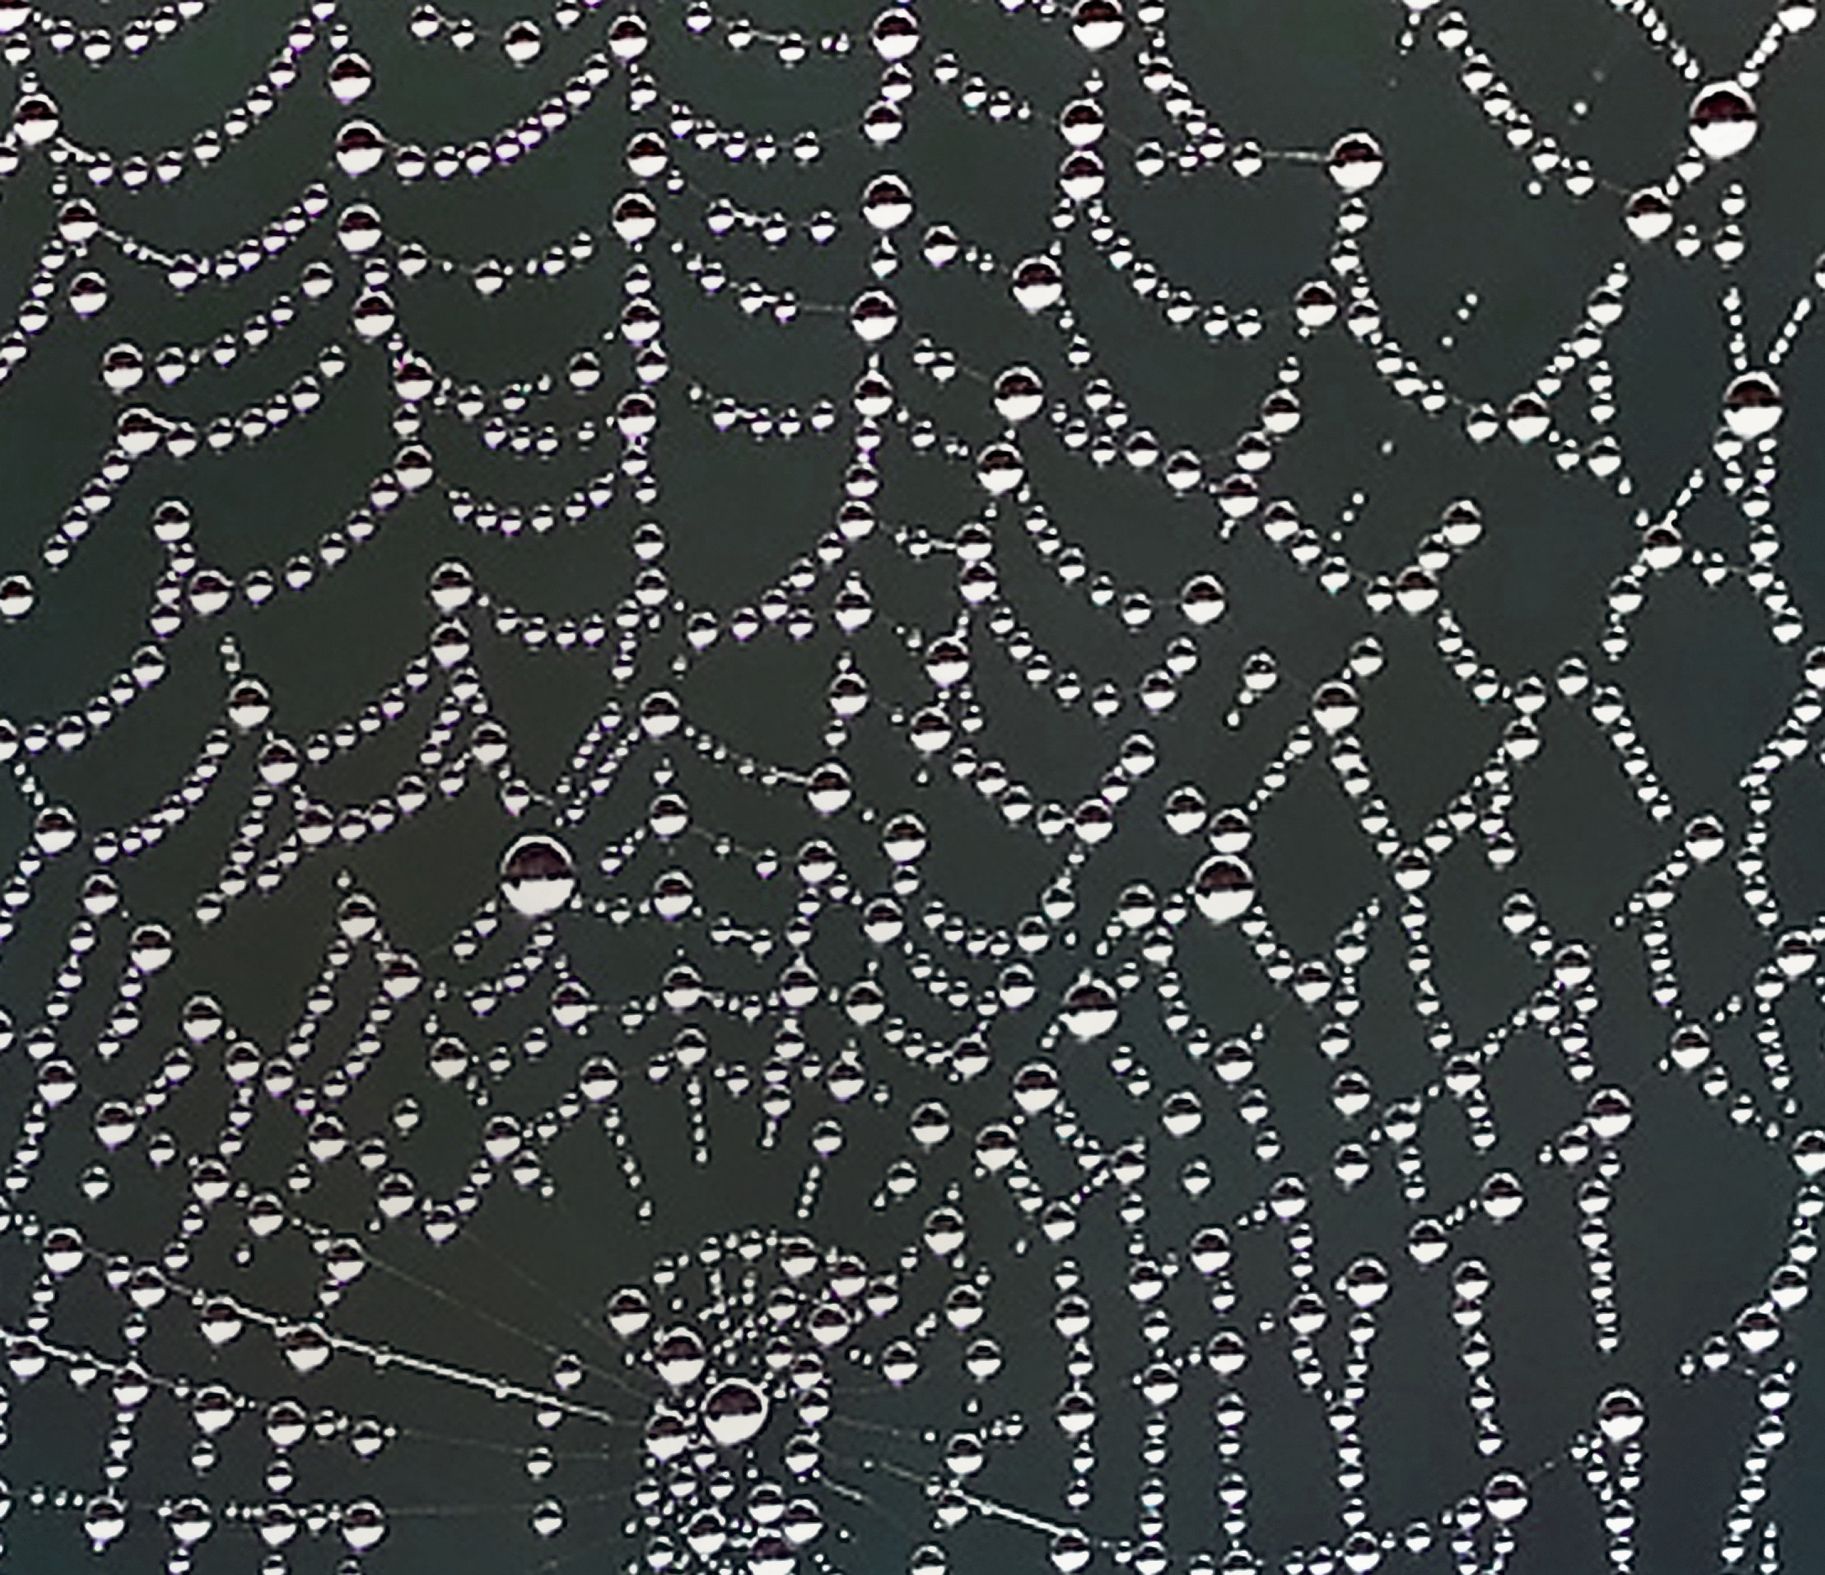 meaning of spider web – Doowans News&Events